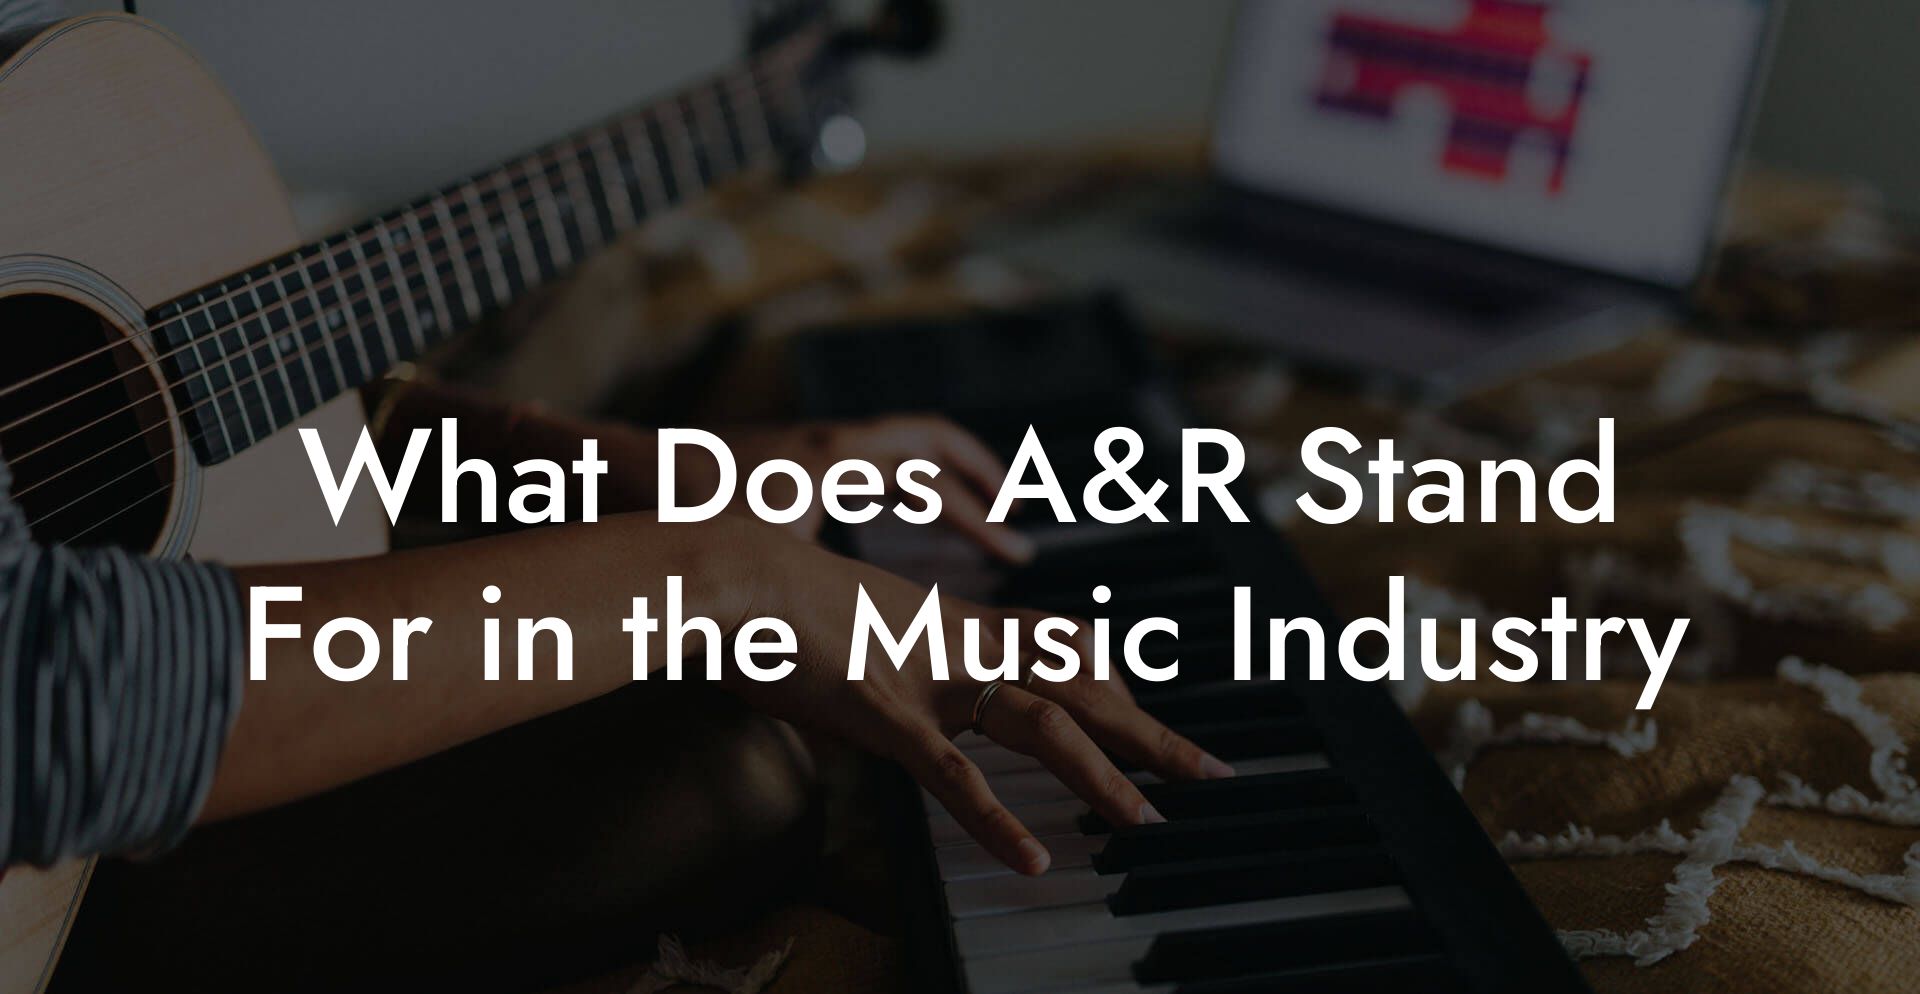 What Does A&R Stand For in the Music Industry